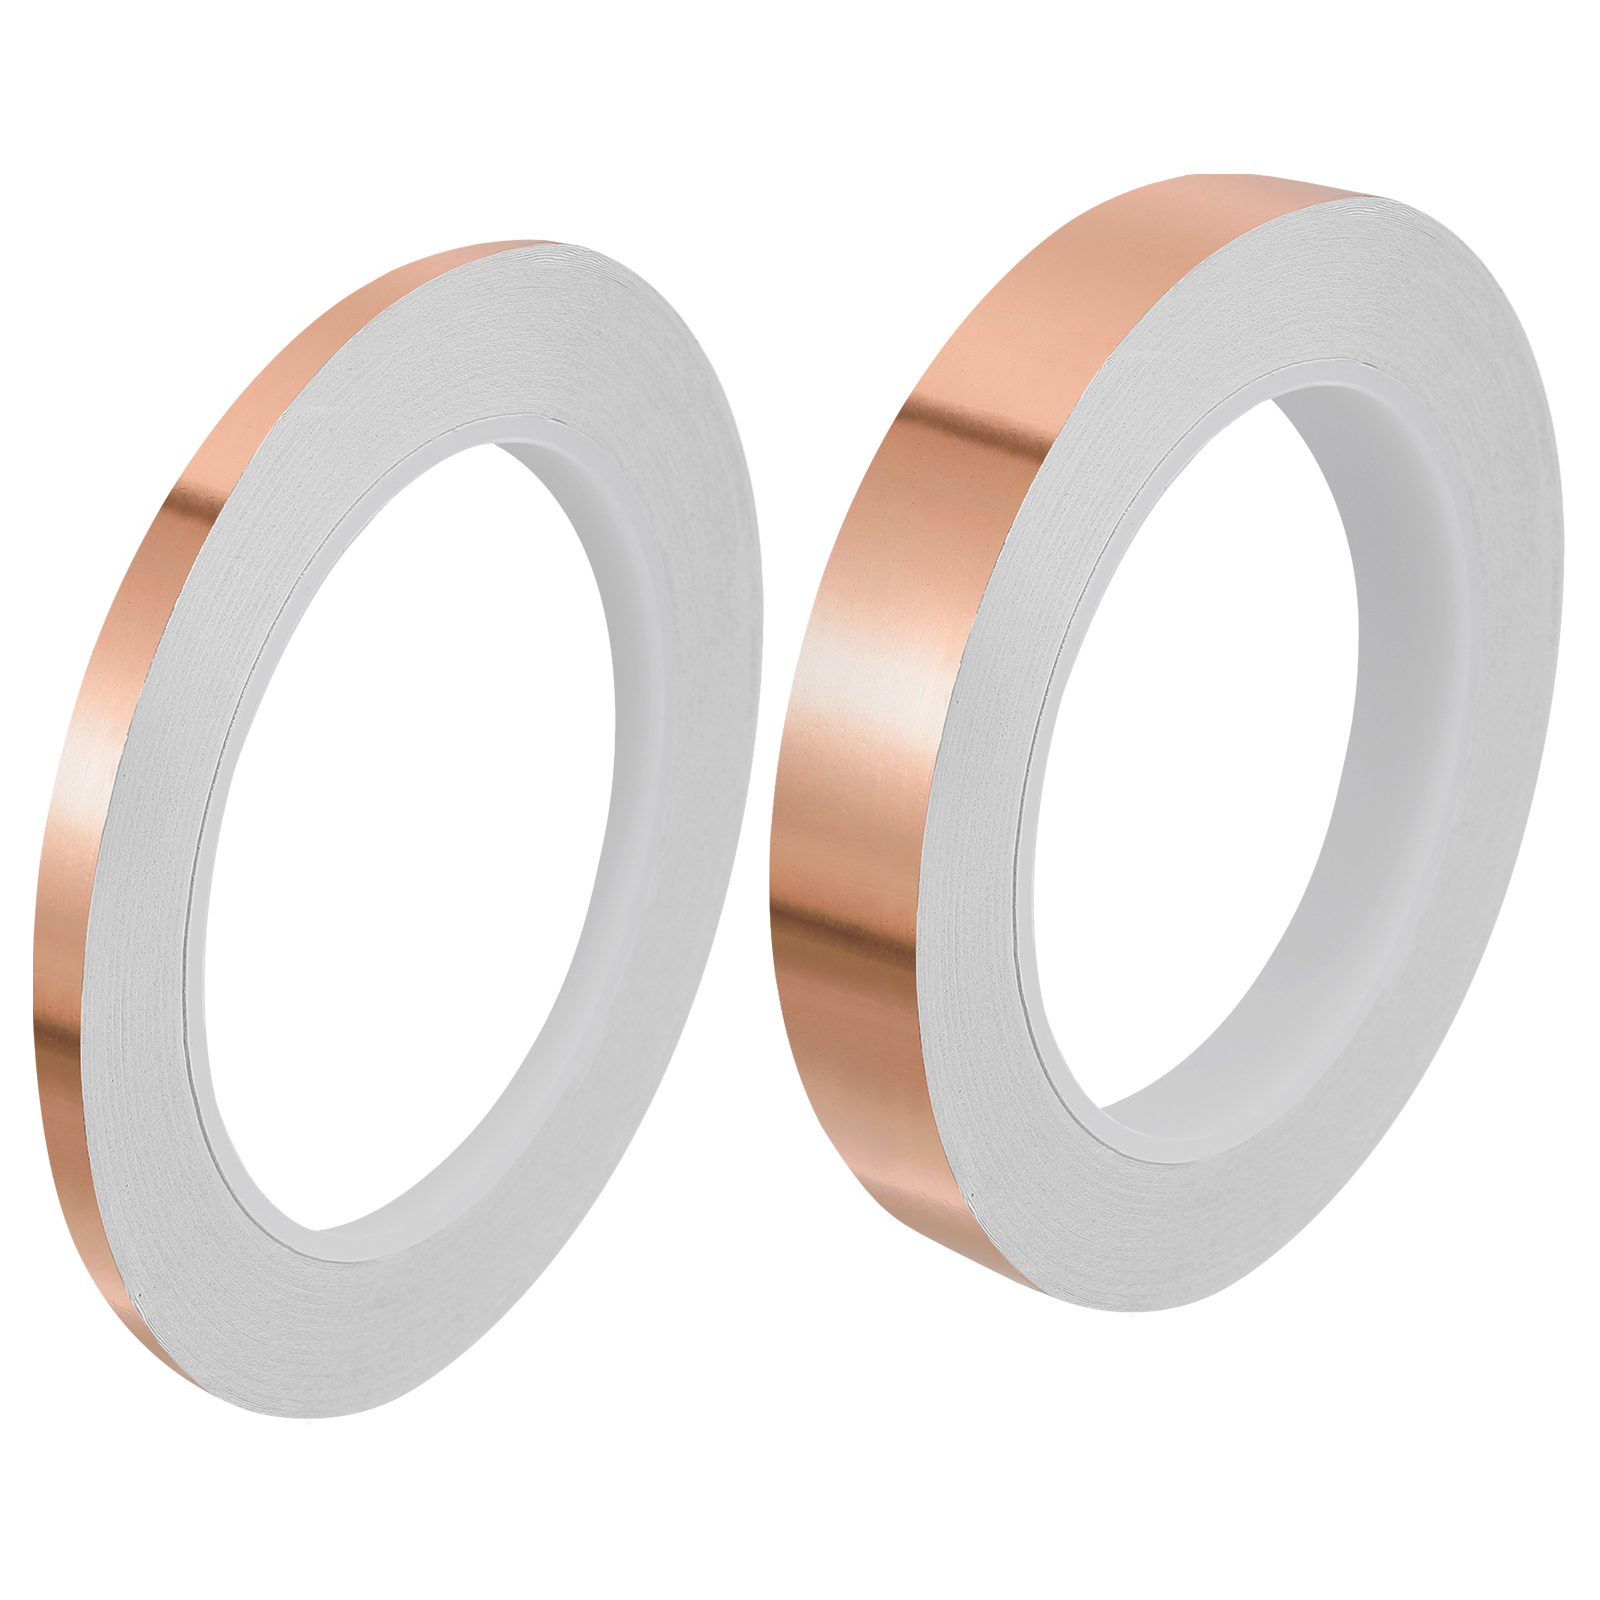 Uxcell Copper Tape 0.24 0.47 21 Yards 0.05mm Thick Copper Foil Single  Sided Conductive Adhesive EMI Shielding 1 Set